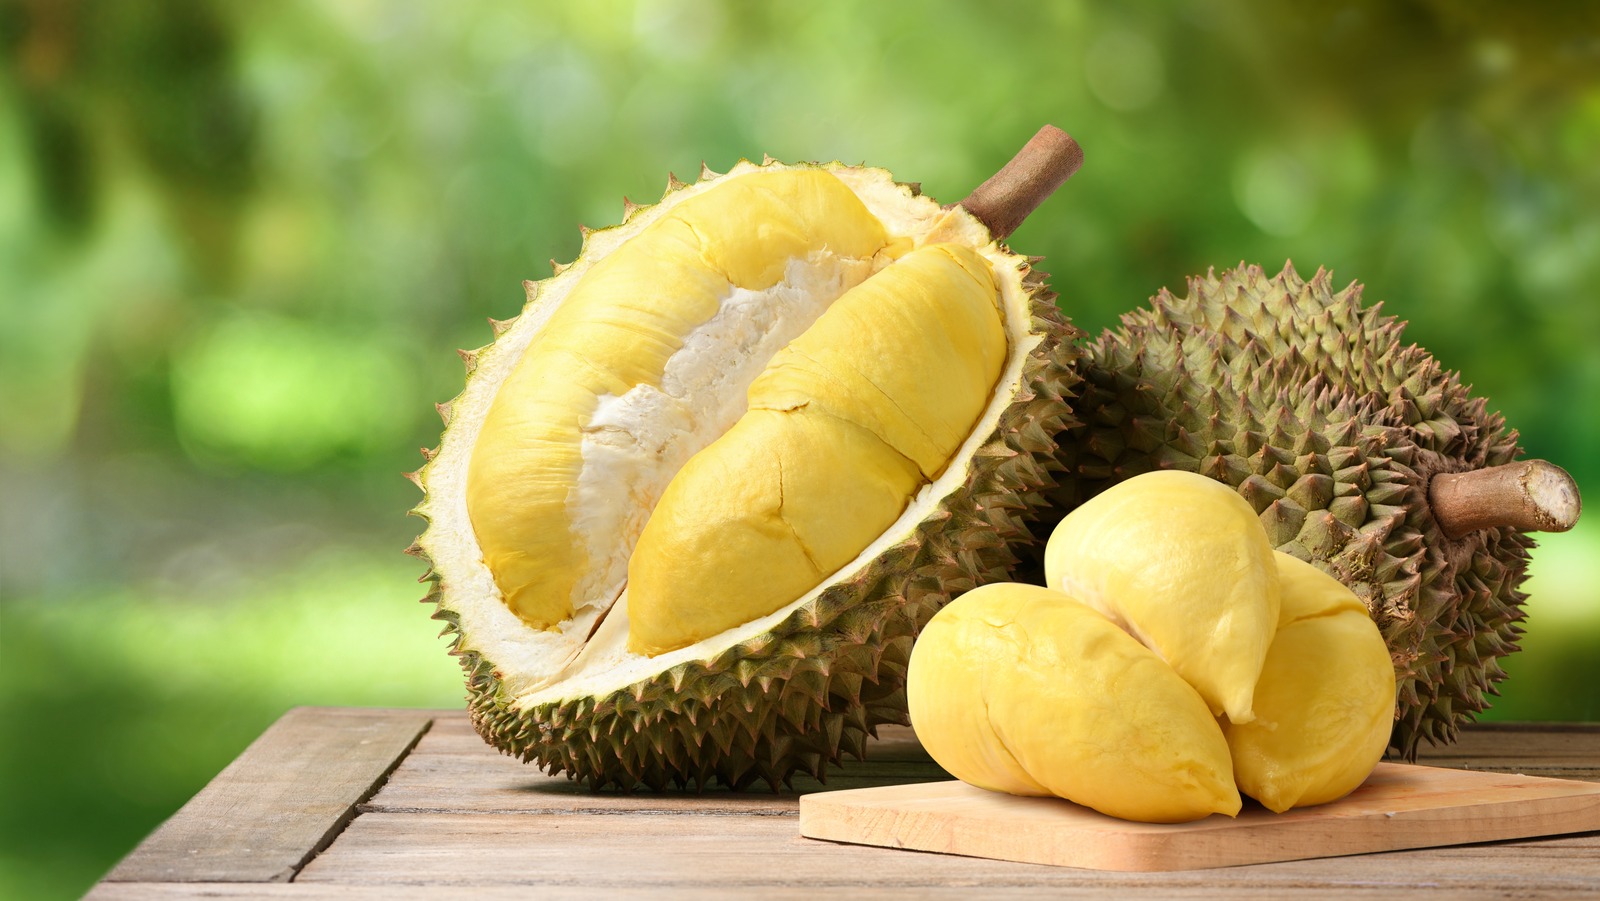 What Is Durian And How Do You Eat It?